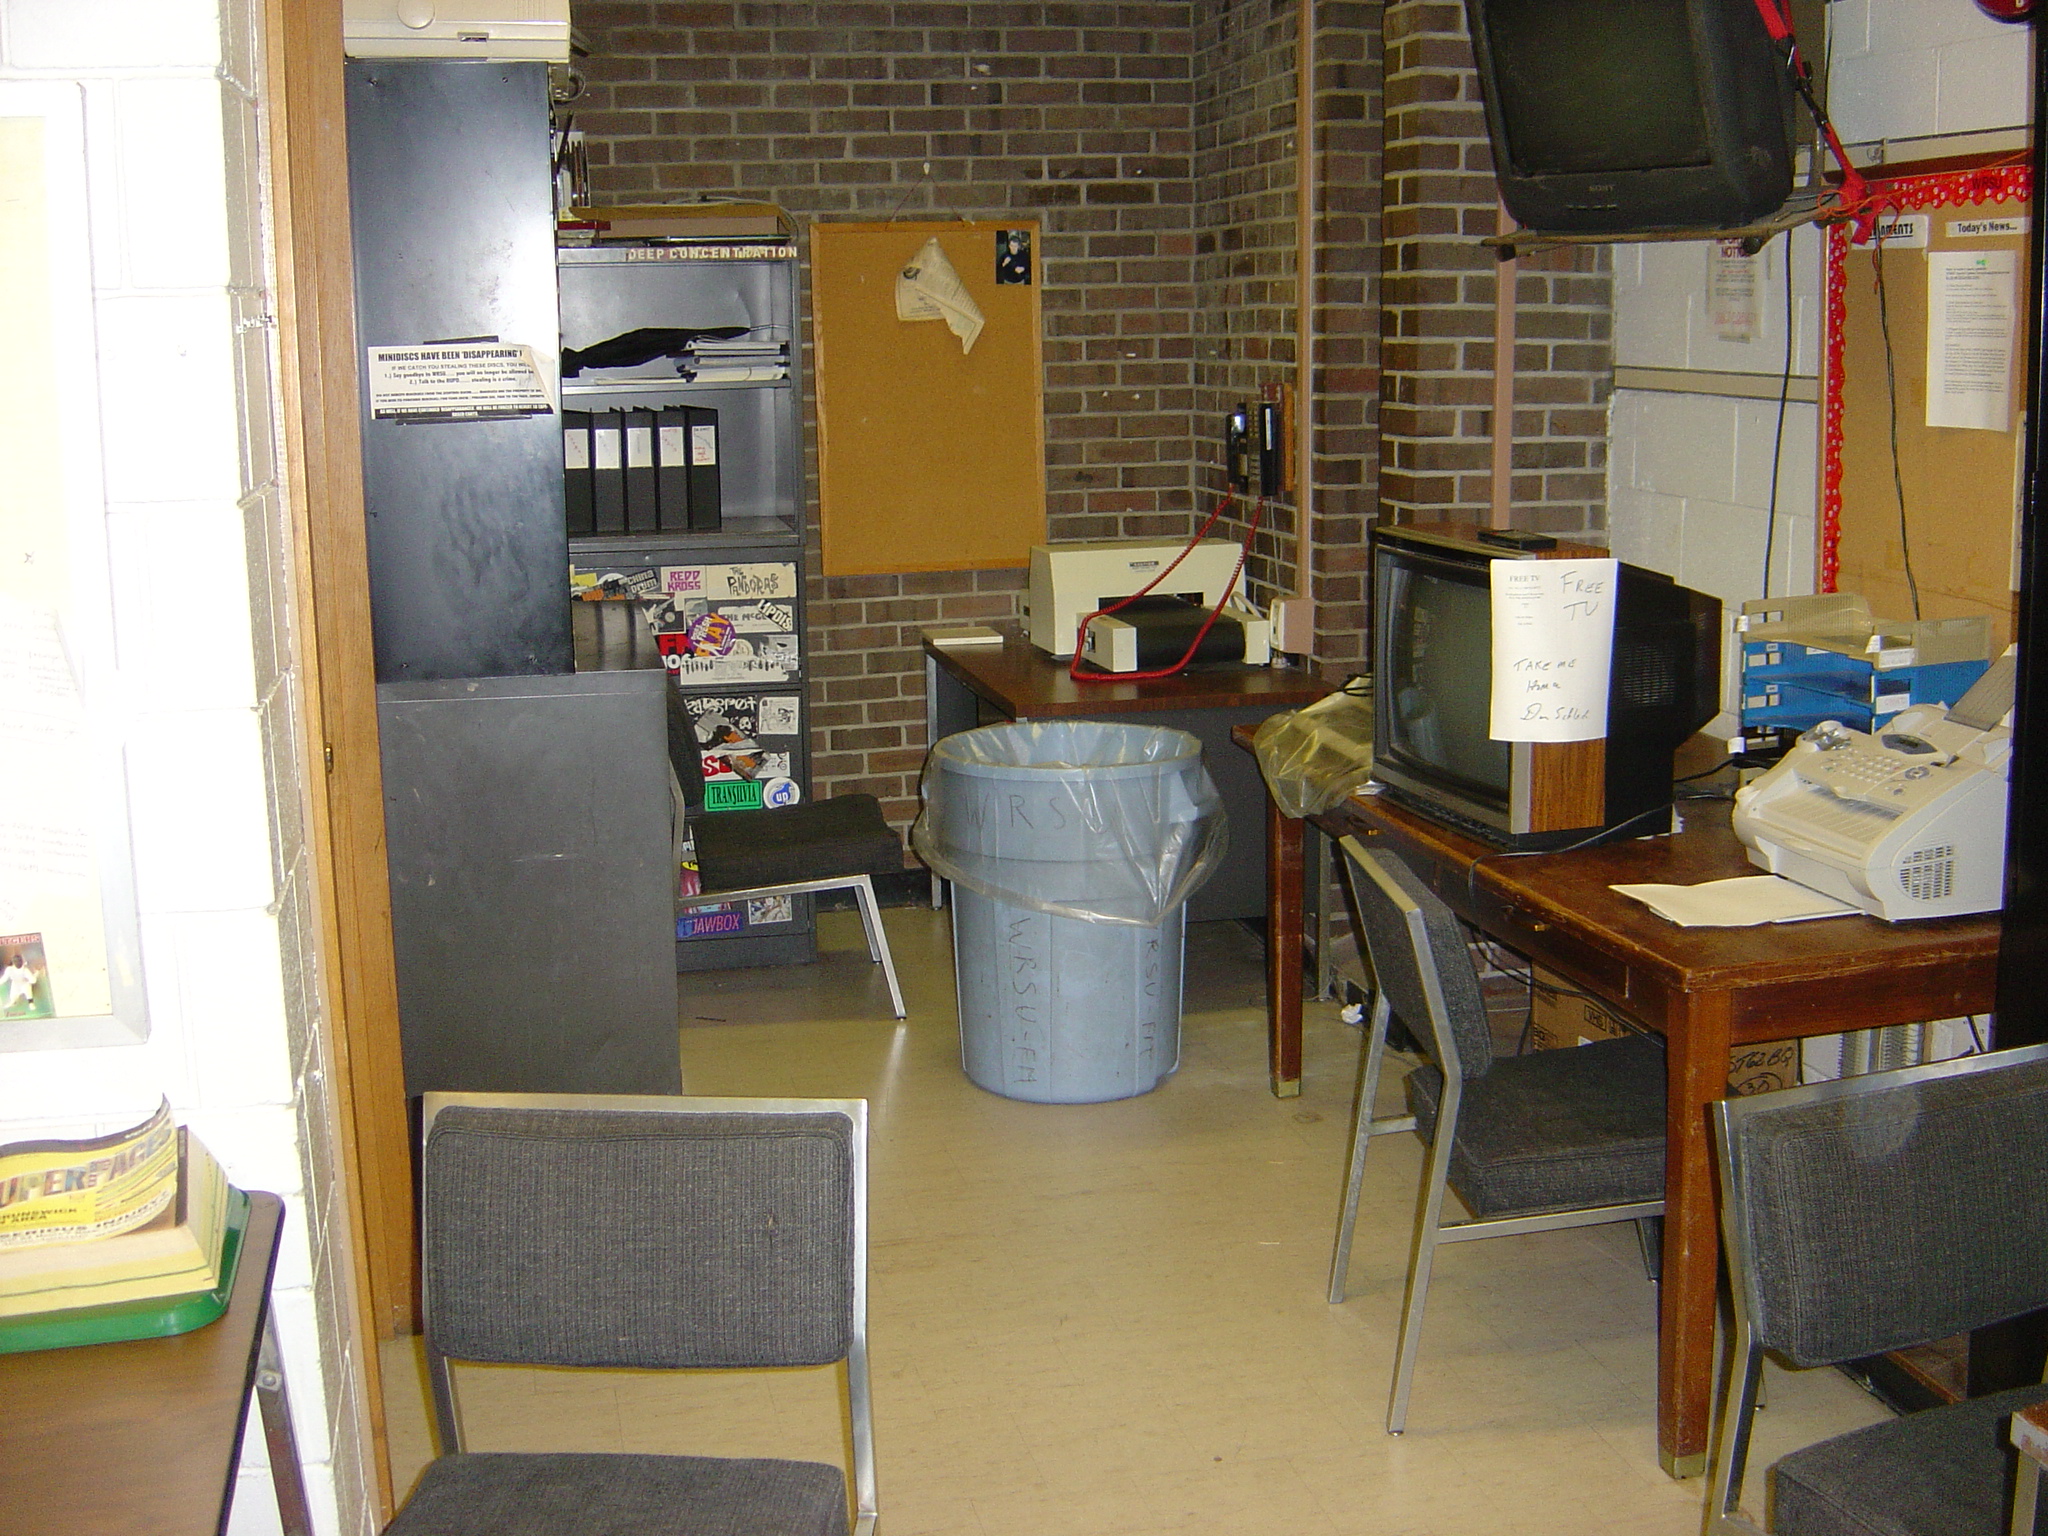 2005 - News Room - Getting a new TV